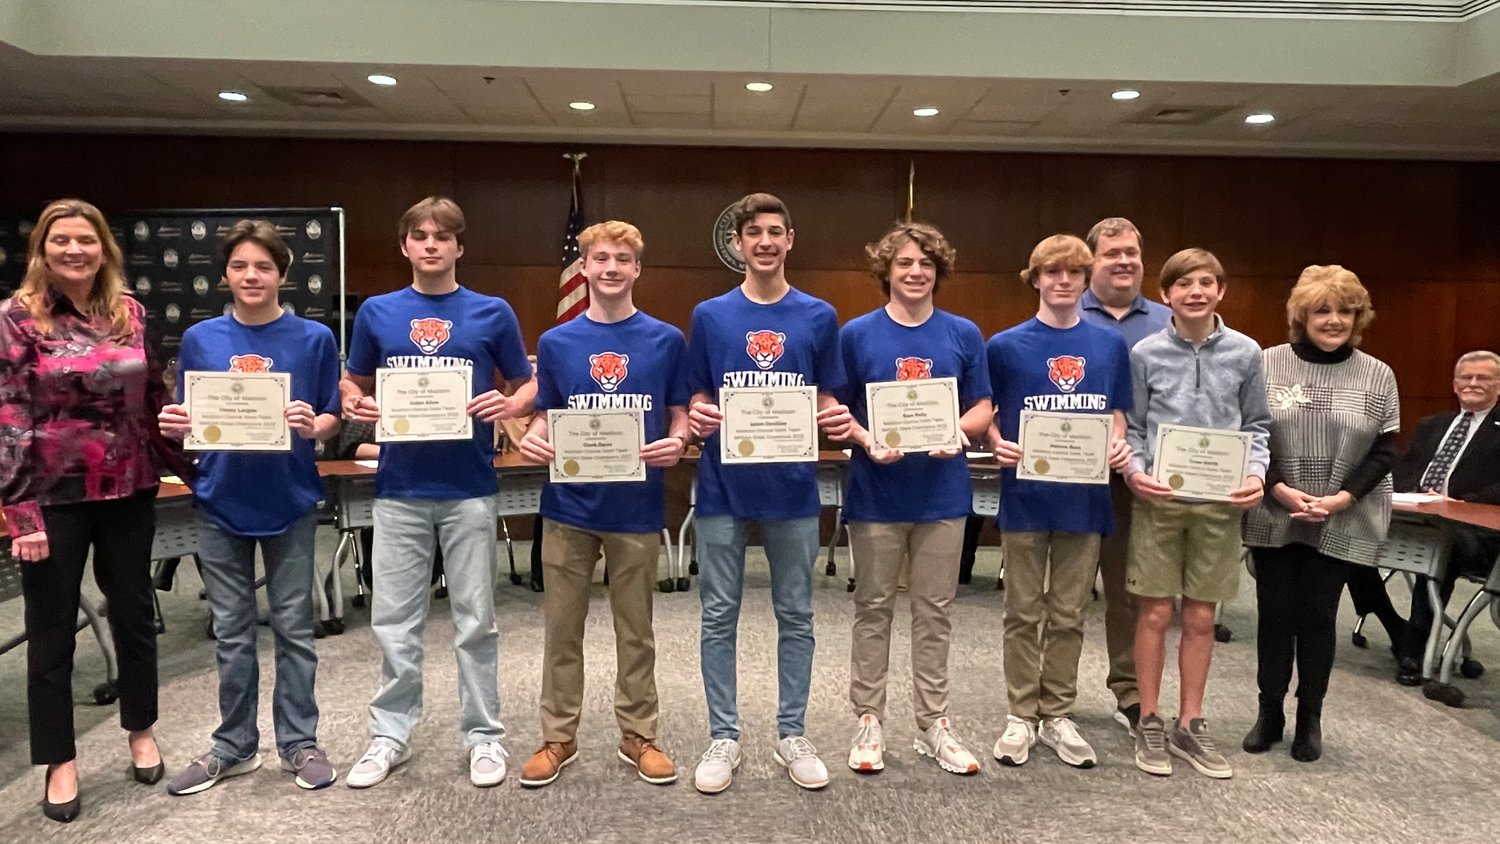 The Madison Central Boys Swim Team received certificates and recognition during the Jan. 17 Madison Board of Alderman meeting for their third-consecutive state championship win. Pictured, from left: Bridget Carmody, Aiden Allen, Clark Davis, Jaden Davillier, Henry Largen, Sam Reily, Patrick Ross, Eddie Ware, Crew Smith, and Mayor Mary Hawkins-Butler.